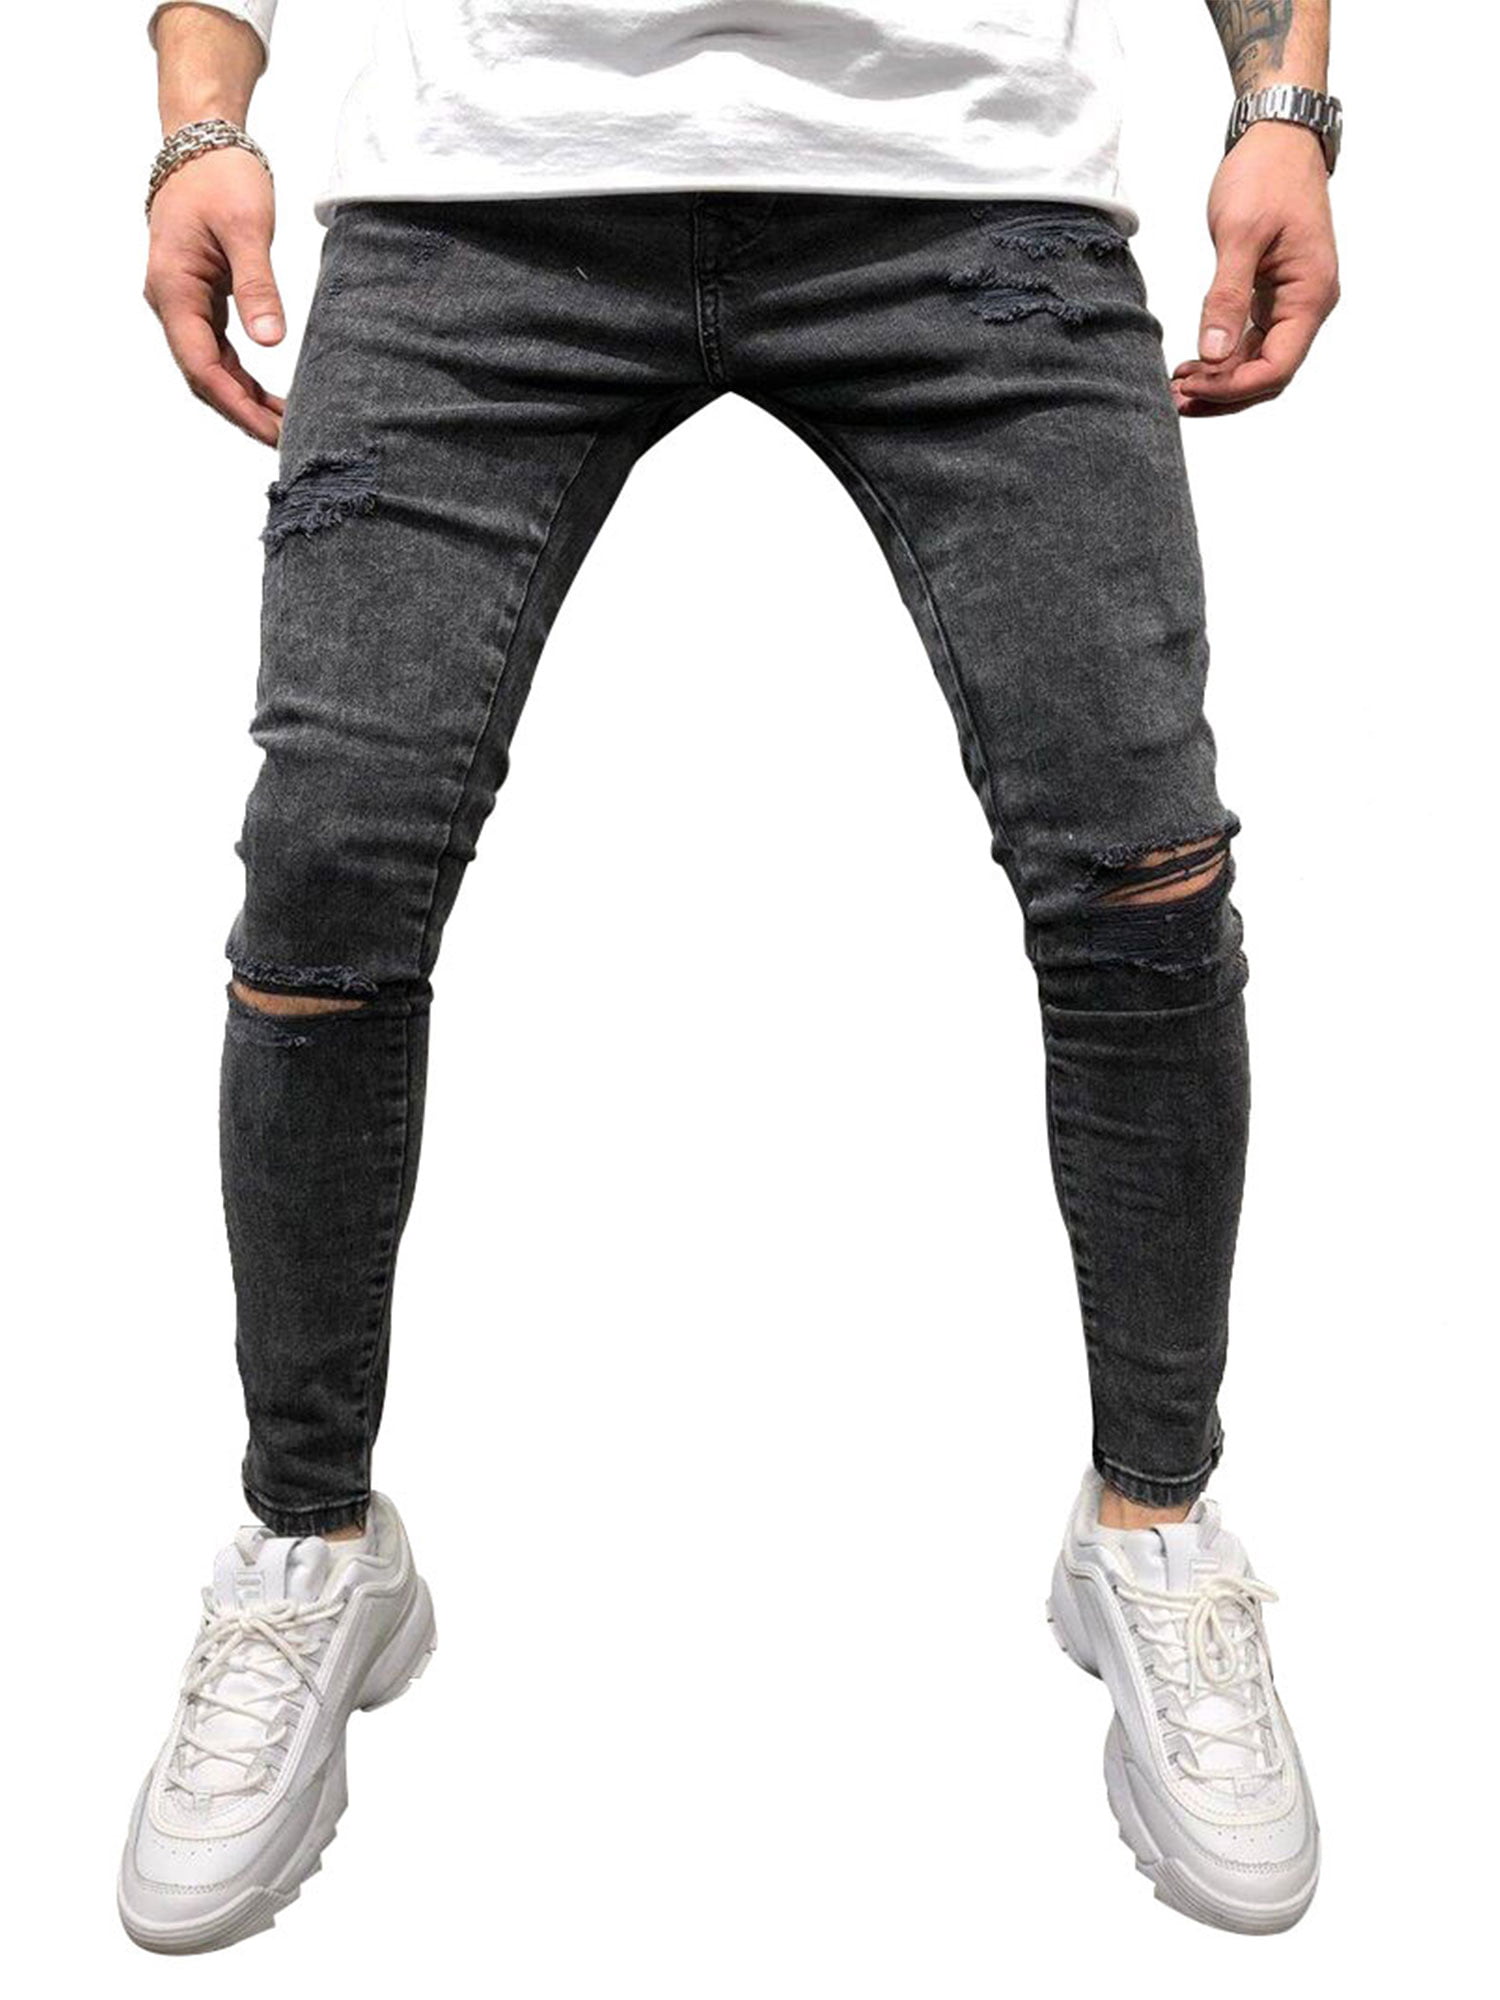 Mens Skinny Stretch Ripped Distressed Jeans Frayed Denim Pants Slim Fit Trousers 